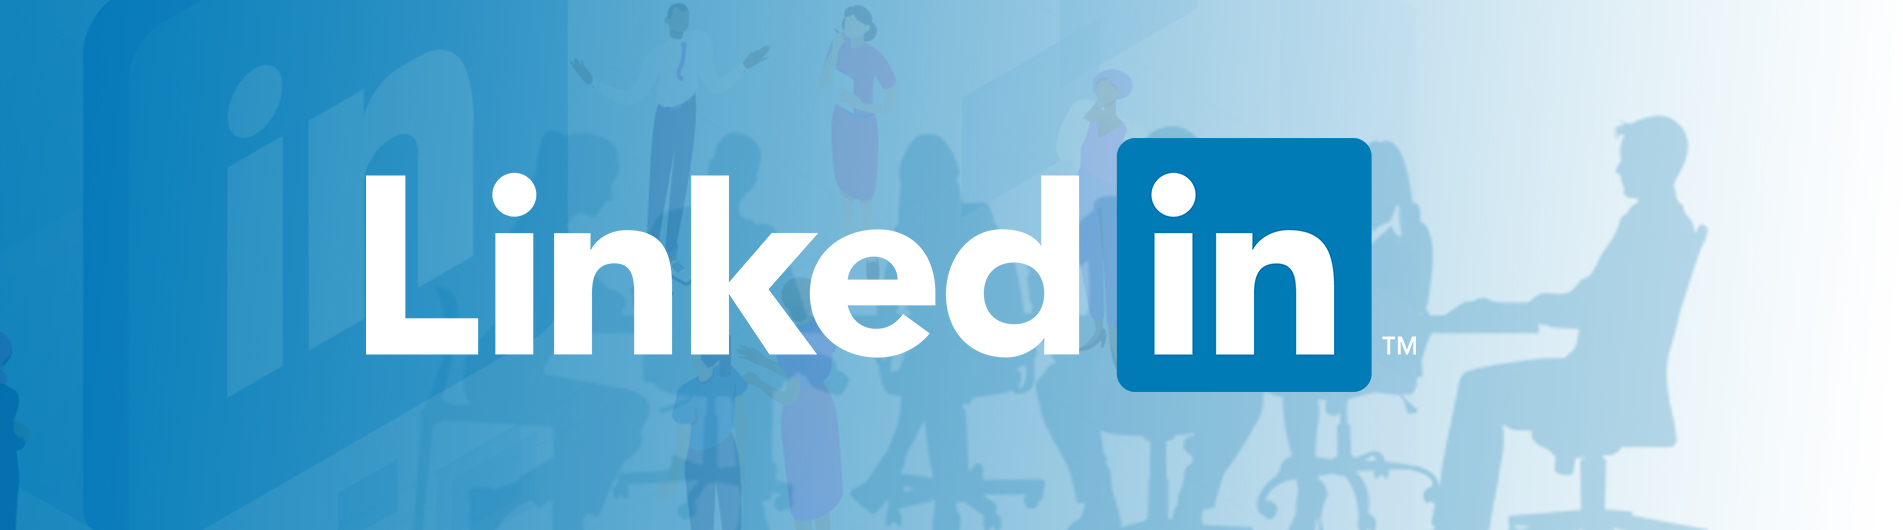 LinkedIn's Creator Mode Streamlines Access to Live Video and Newsletters